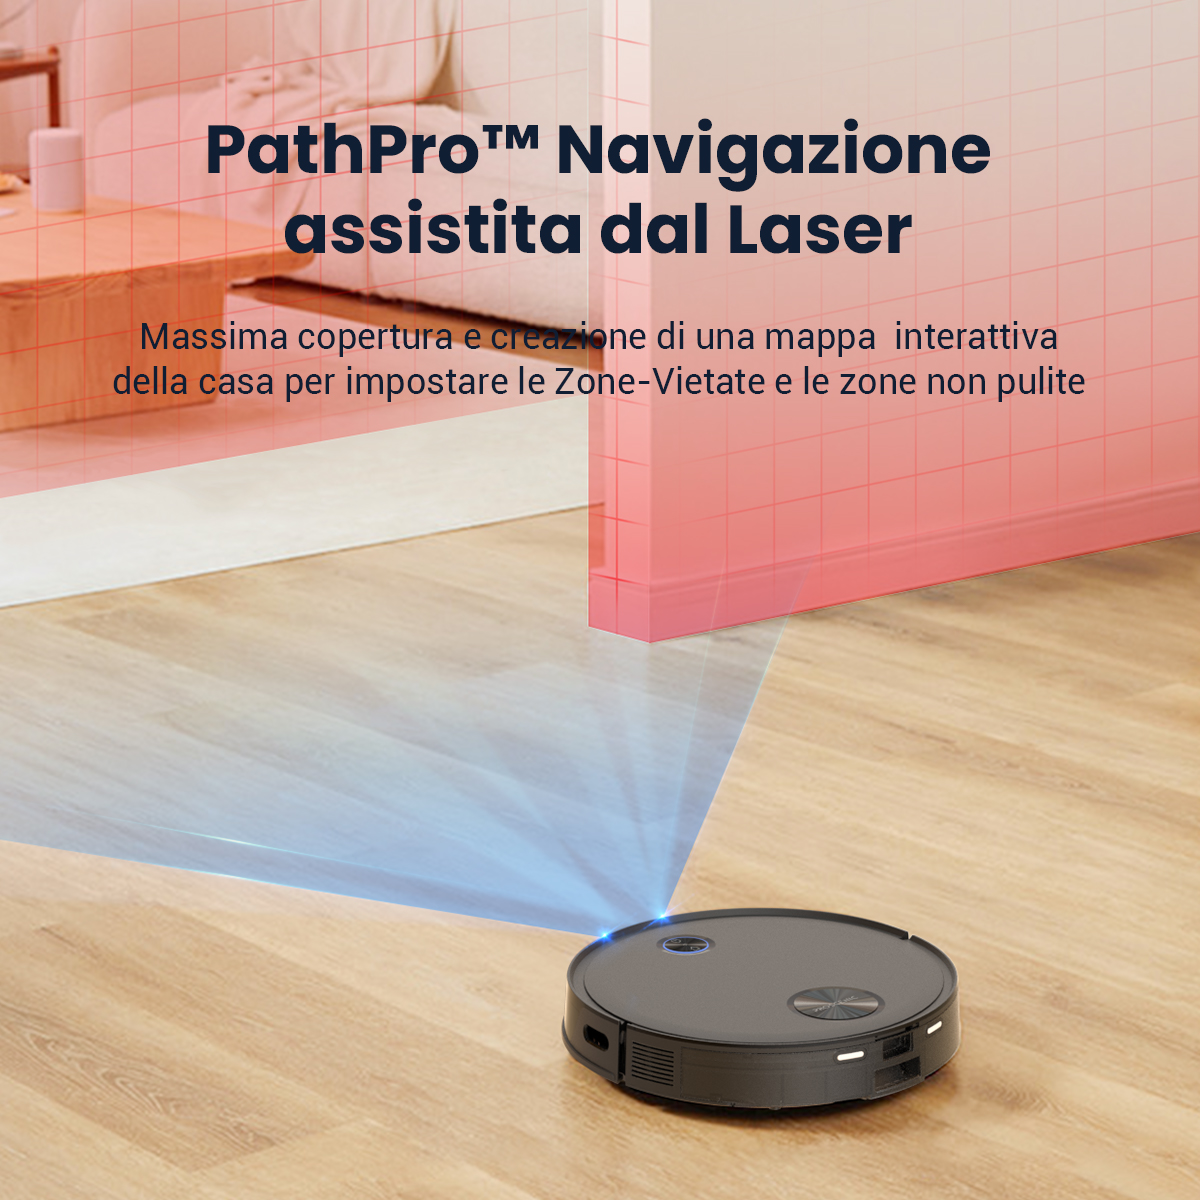 50% off on Proscenic V10 Robotic Vacuum and Mop